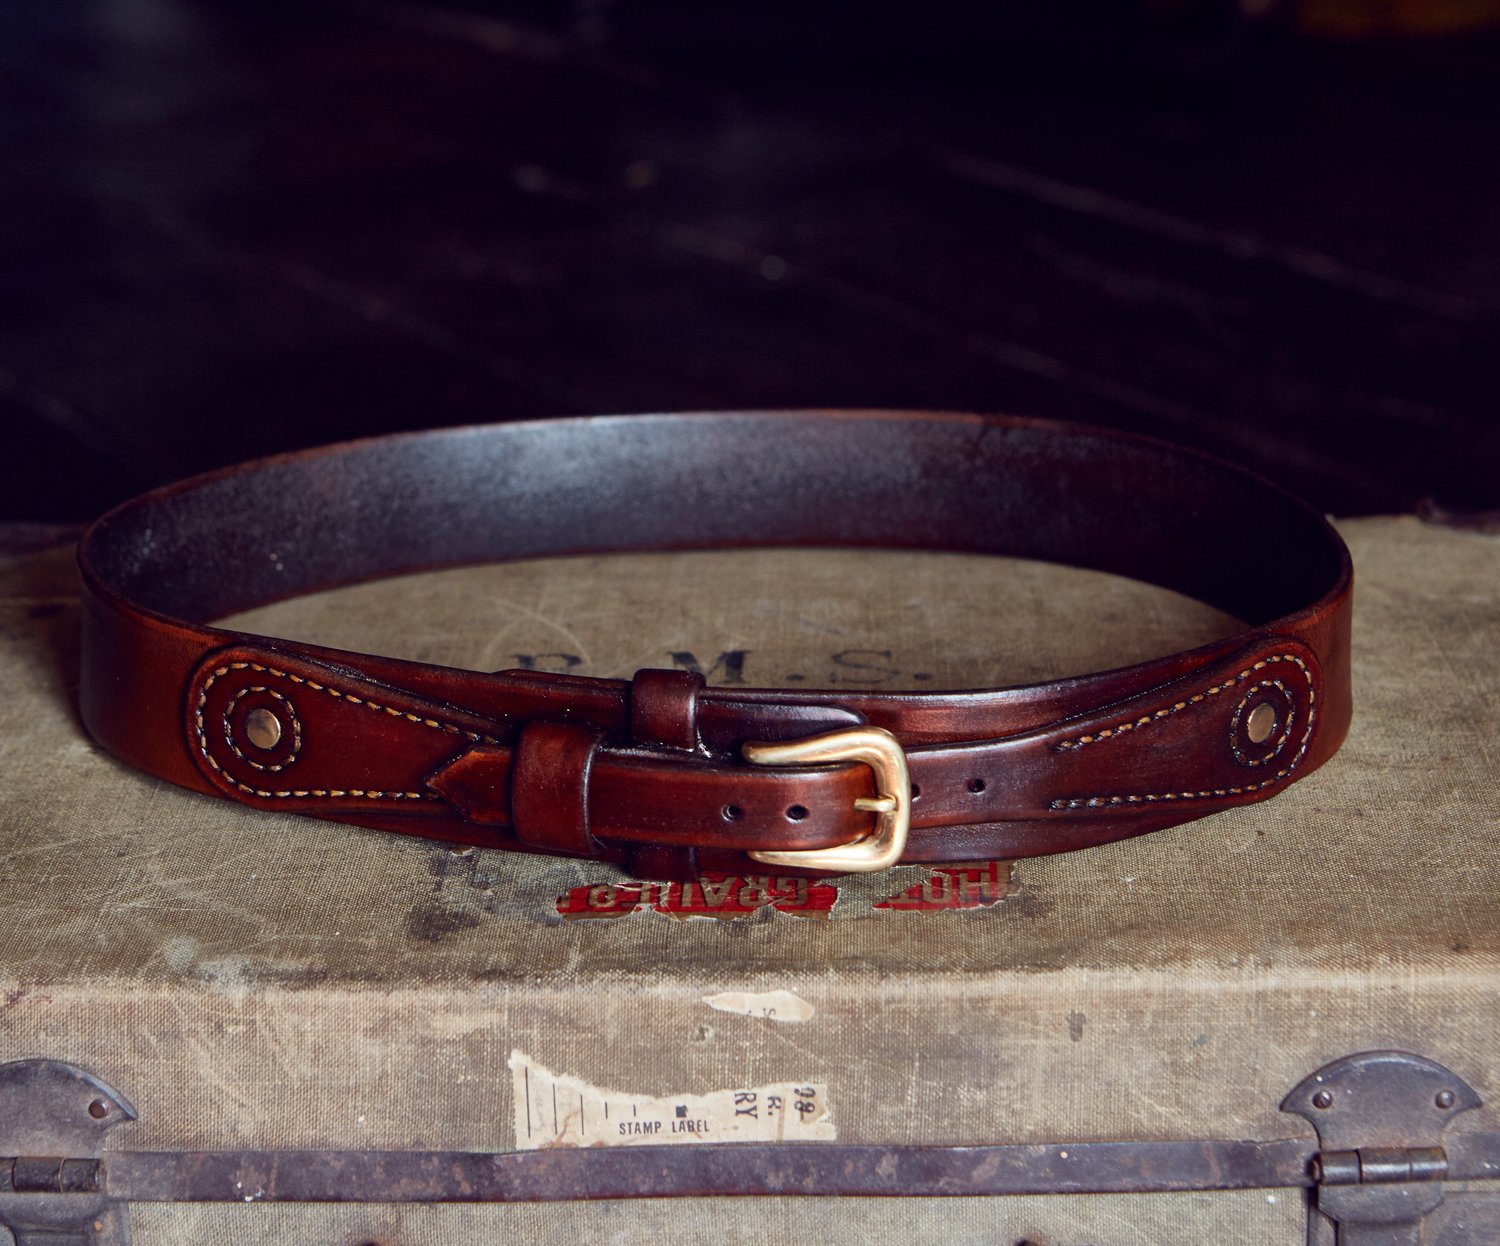 Hawkmoth Leather Co. – Punjab belt review